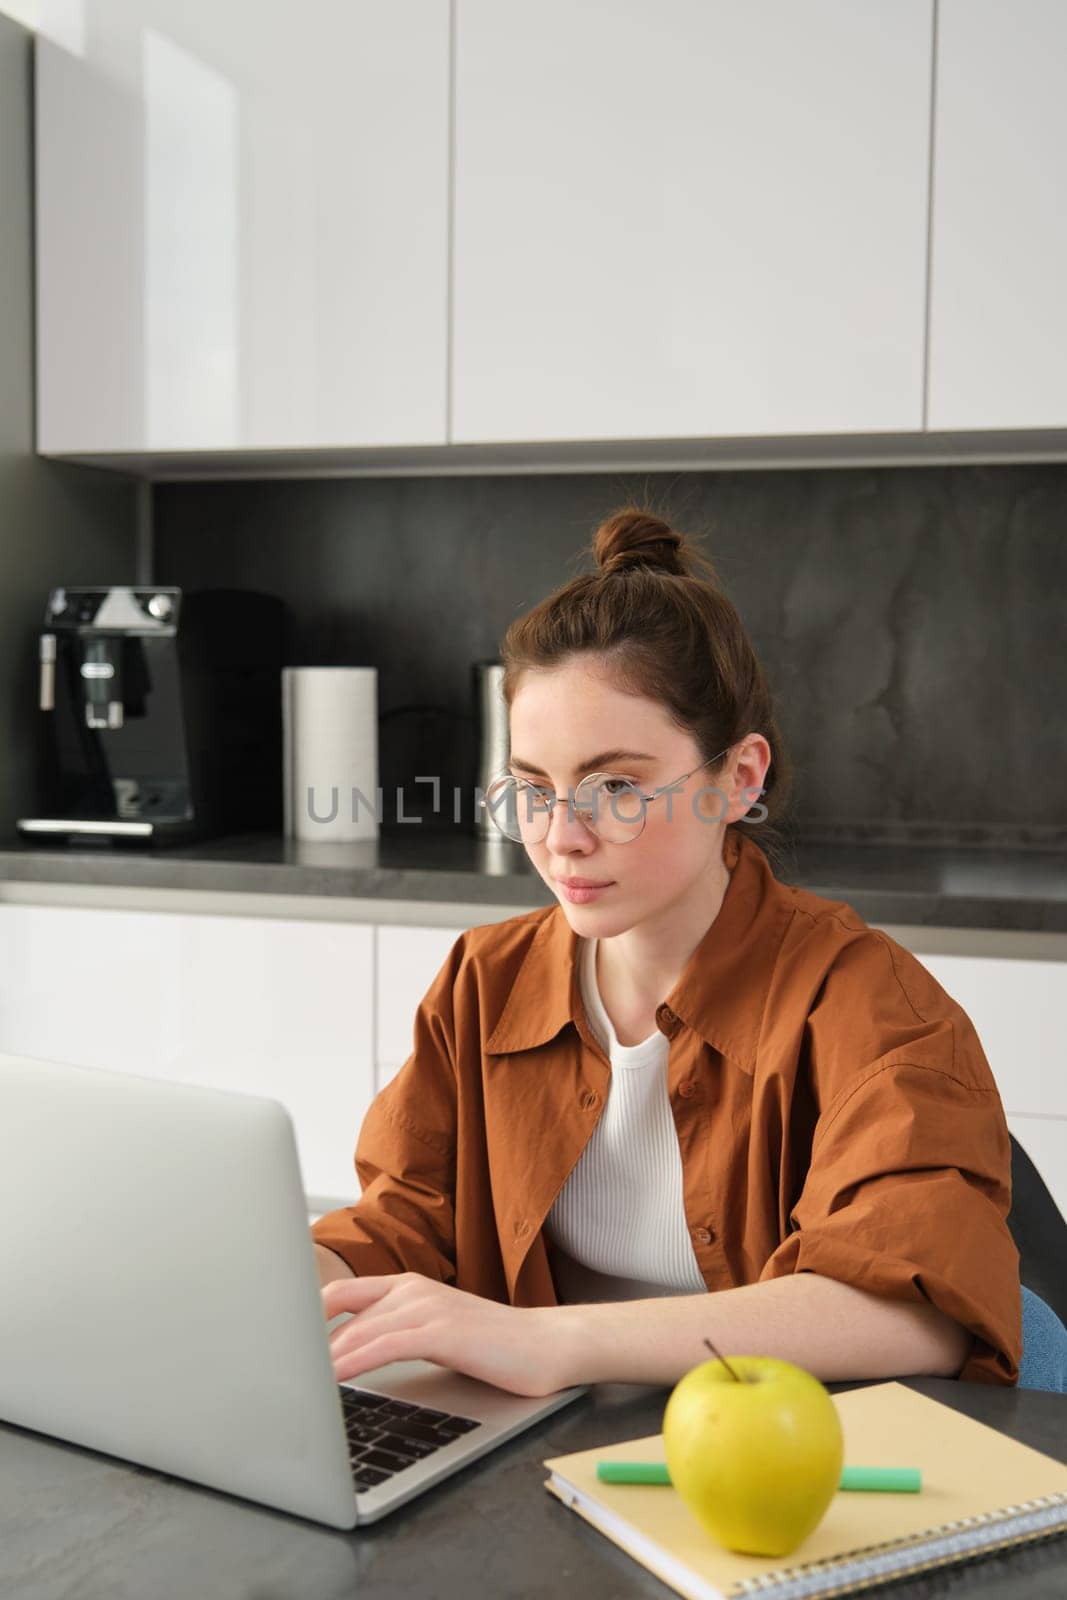 Vertical shot of woman working from home, business owner using laptop, browsing social media on computer, wearing glasses.